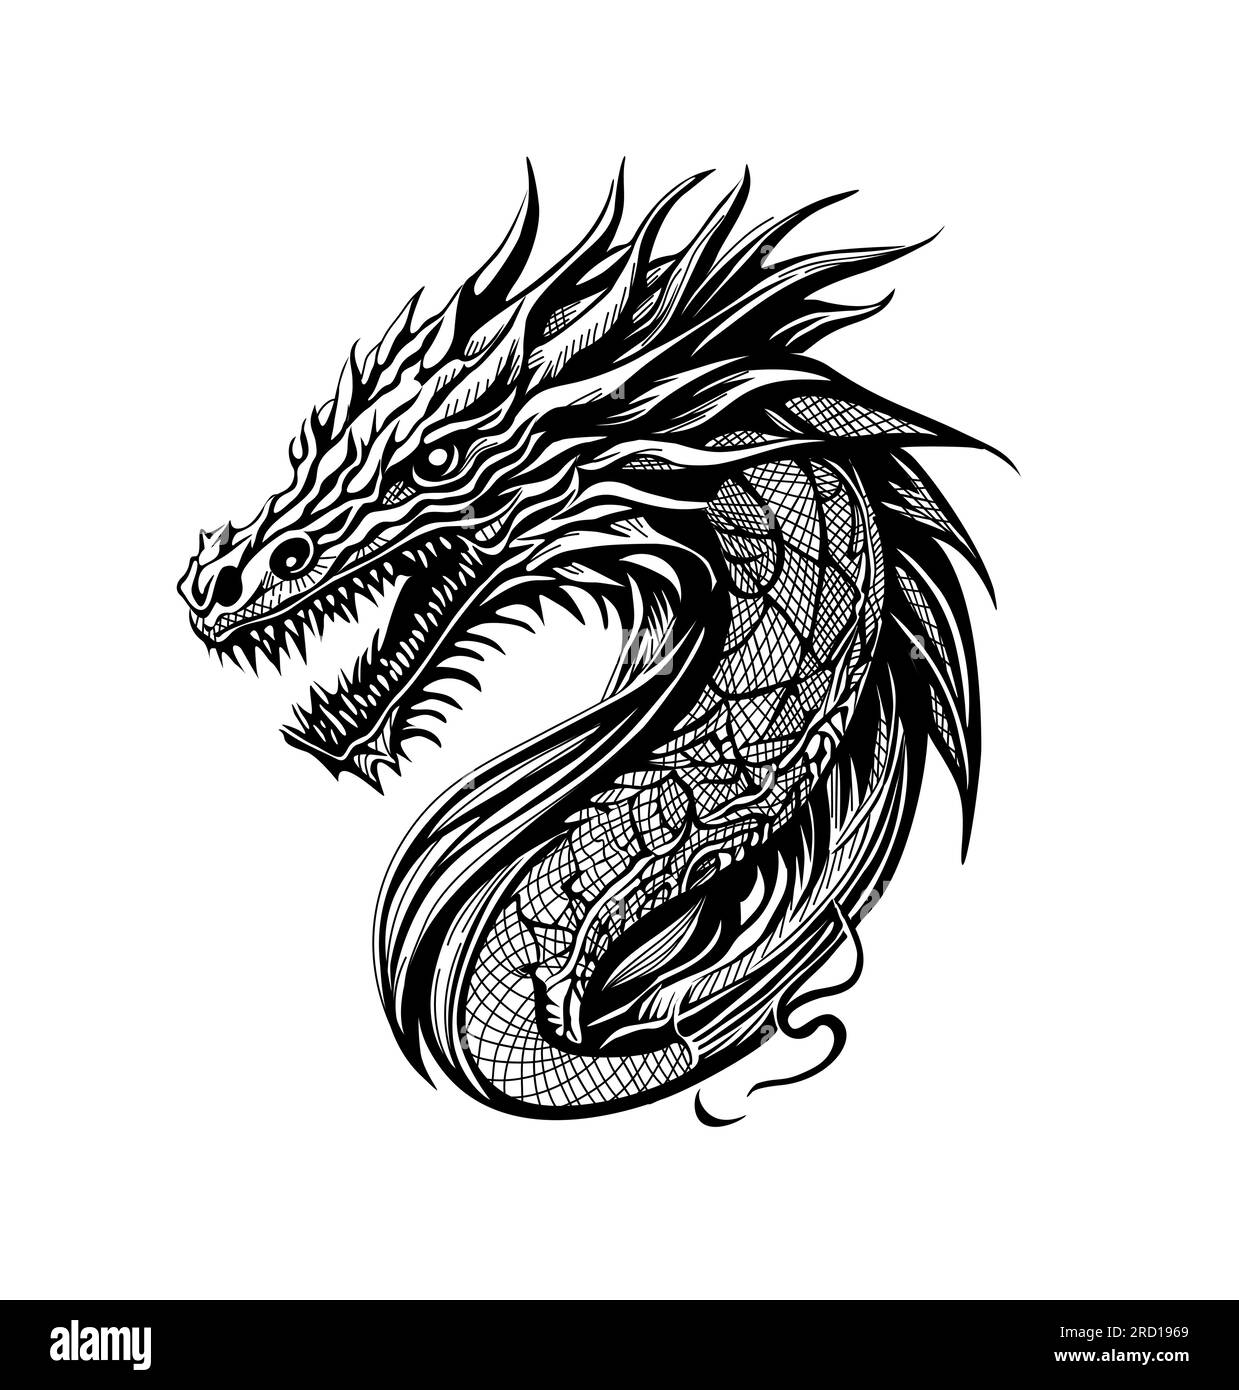 Japanese dragon black and white drawing vector. Stock Vector